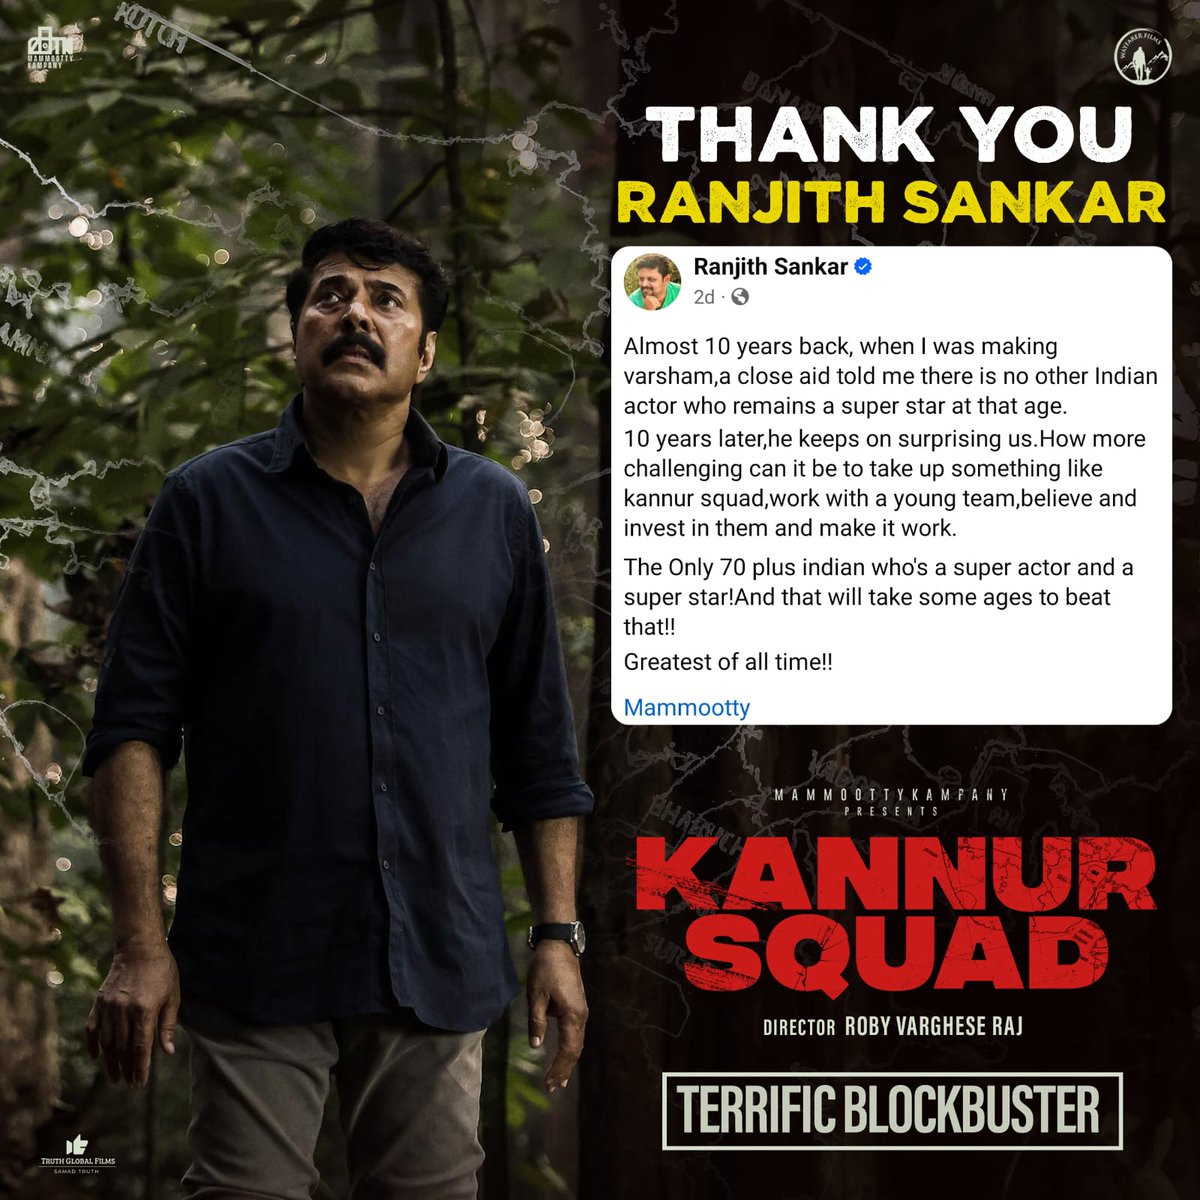 Thank you @ranjithsankar for this Wonderful Review !! We are Elated to hear that you loved #KannurSquad & George Martin 🤗❤️

#RanjithSankar #Mammootty #MammoottyKampany